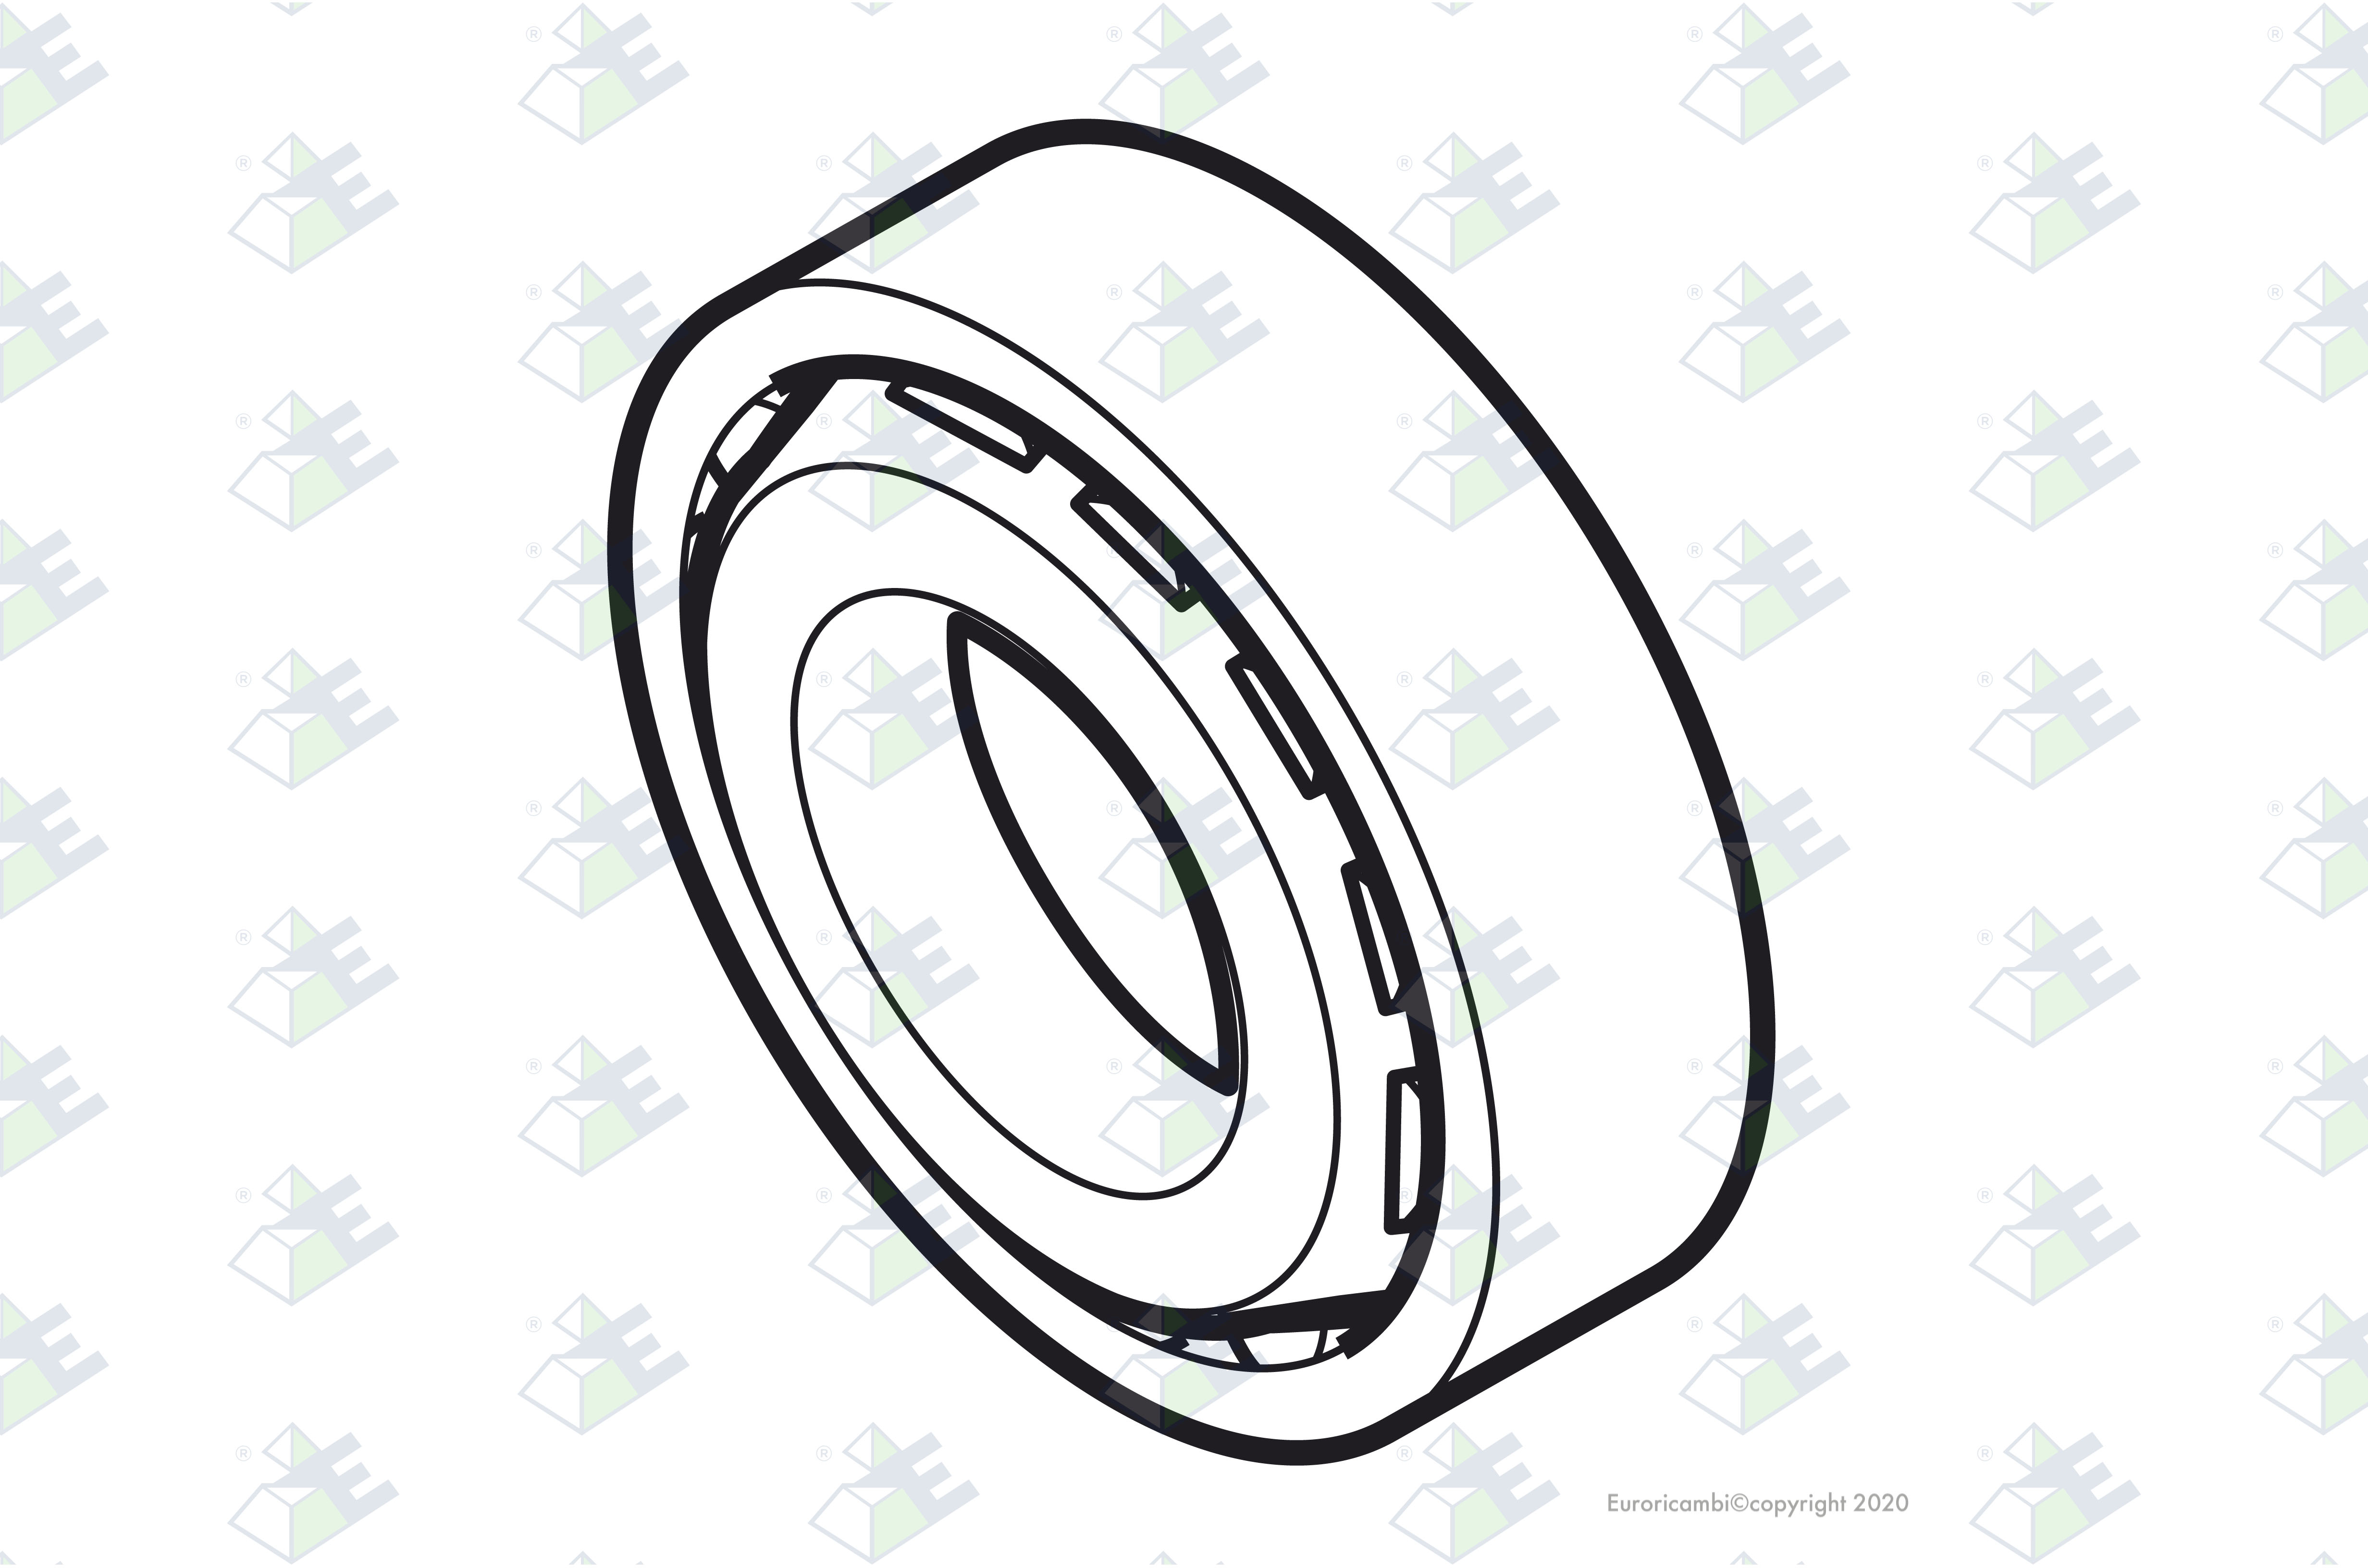 BEARING 130X200X45 MM suitable to MERITOR A11228R1708